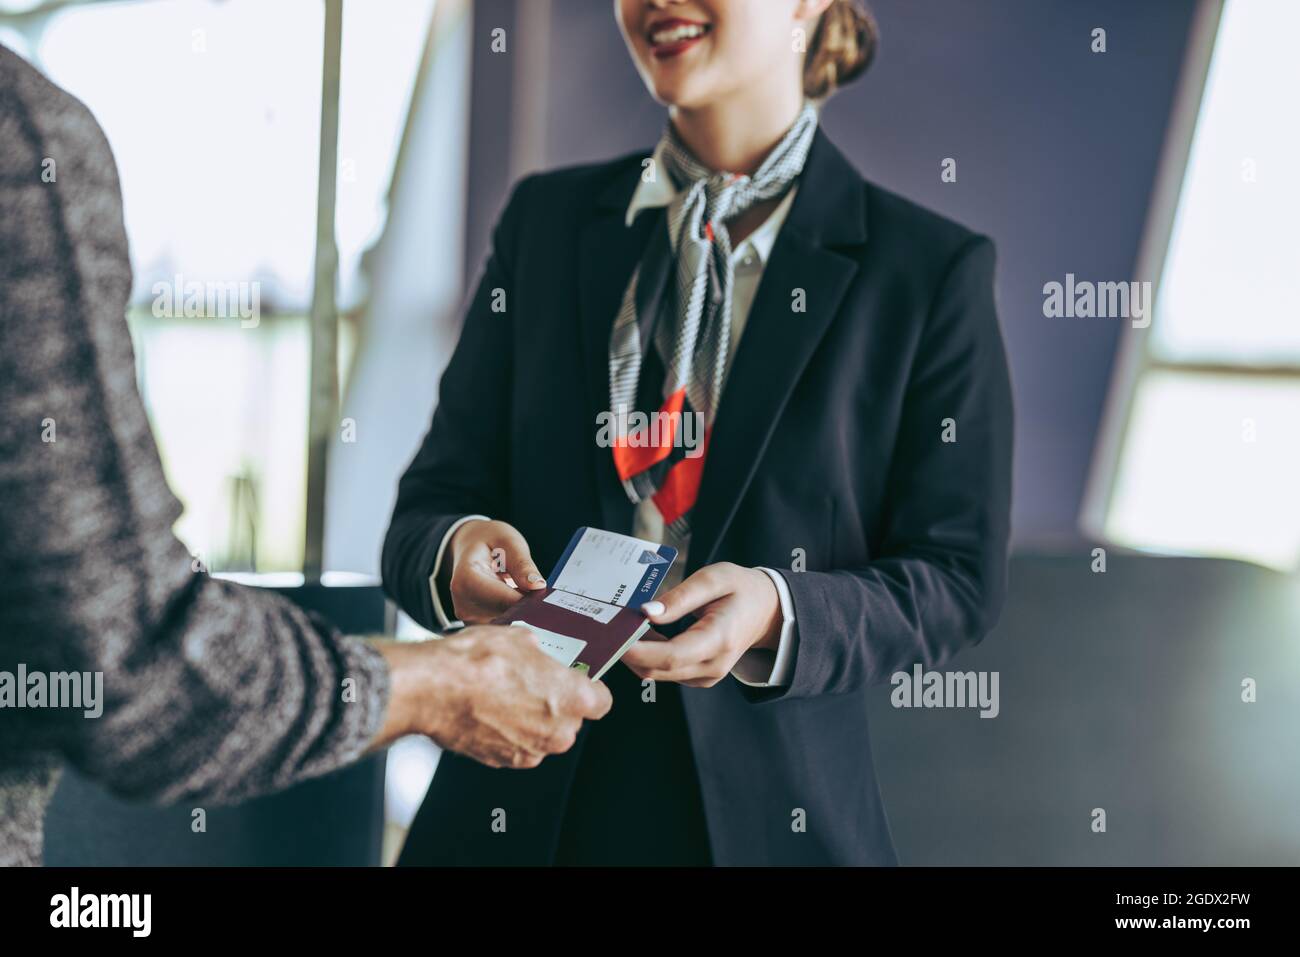 Cropped shot of airlines attendant with tourist at airport check-in counter. Ground staff checking traveler boarding pass at airport. Stock Photo